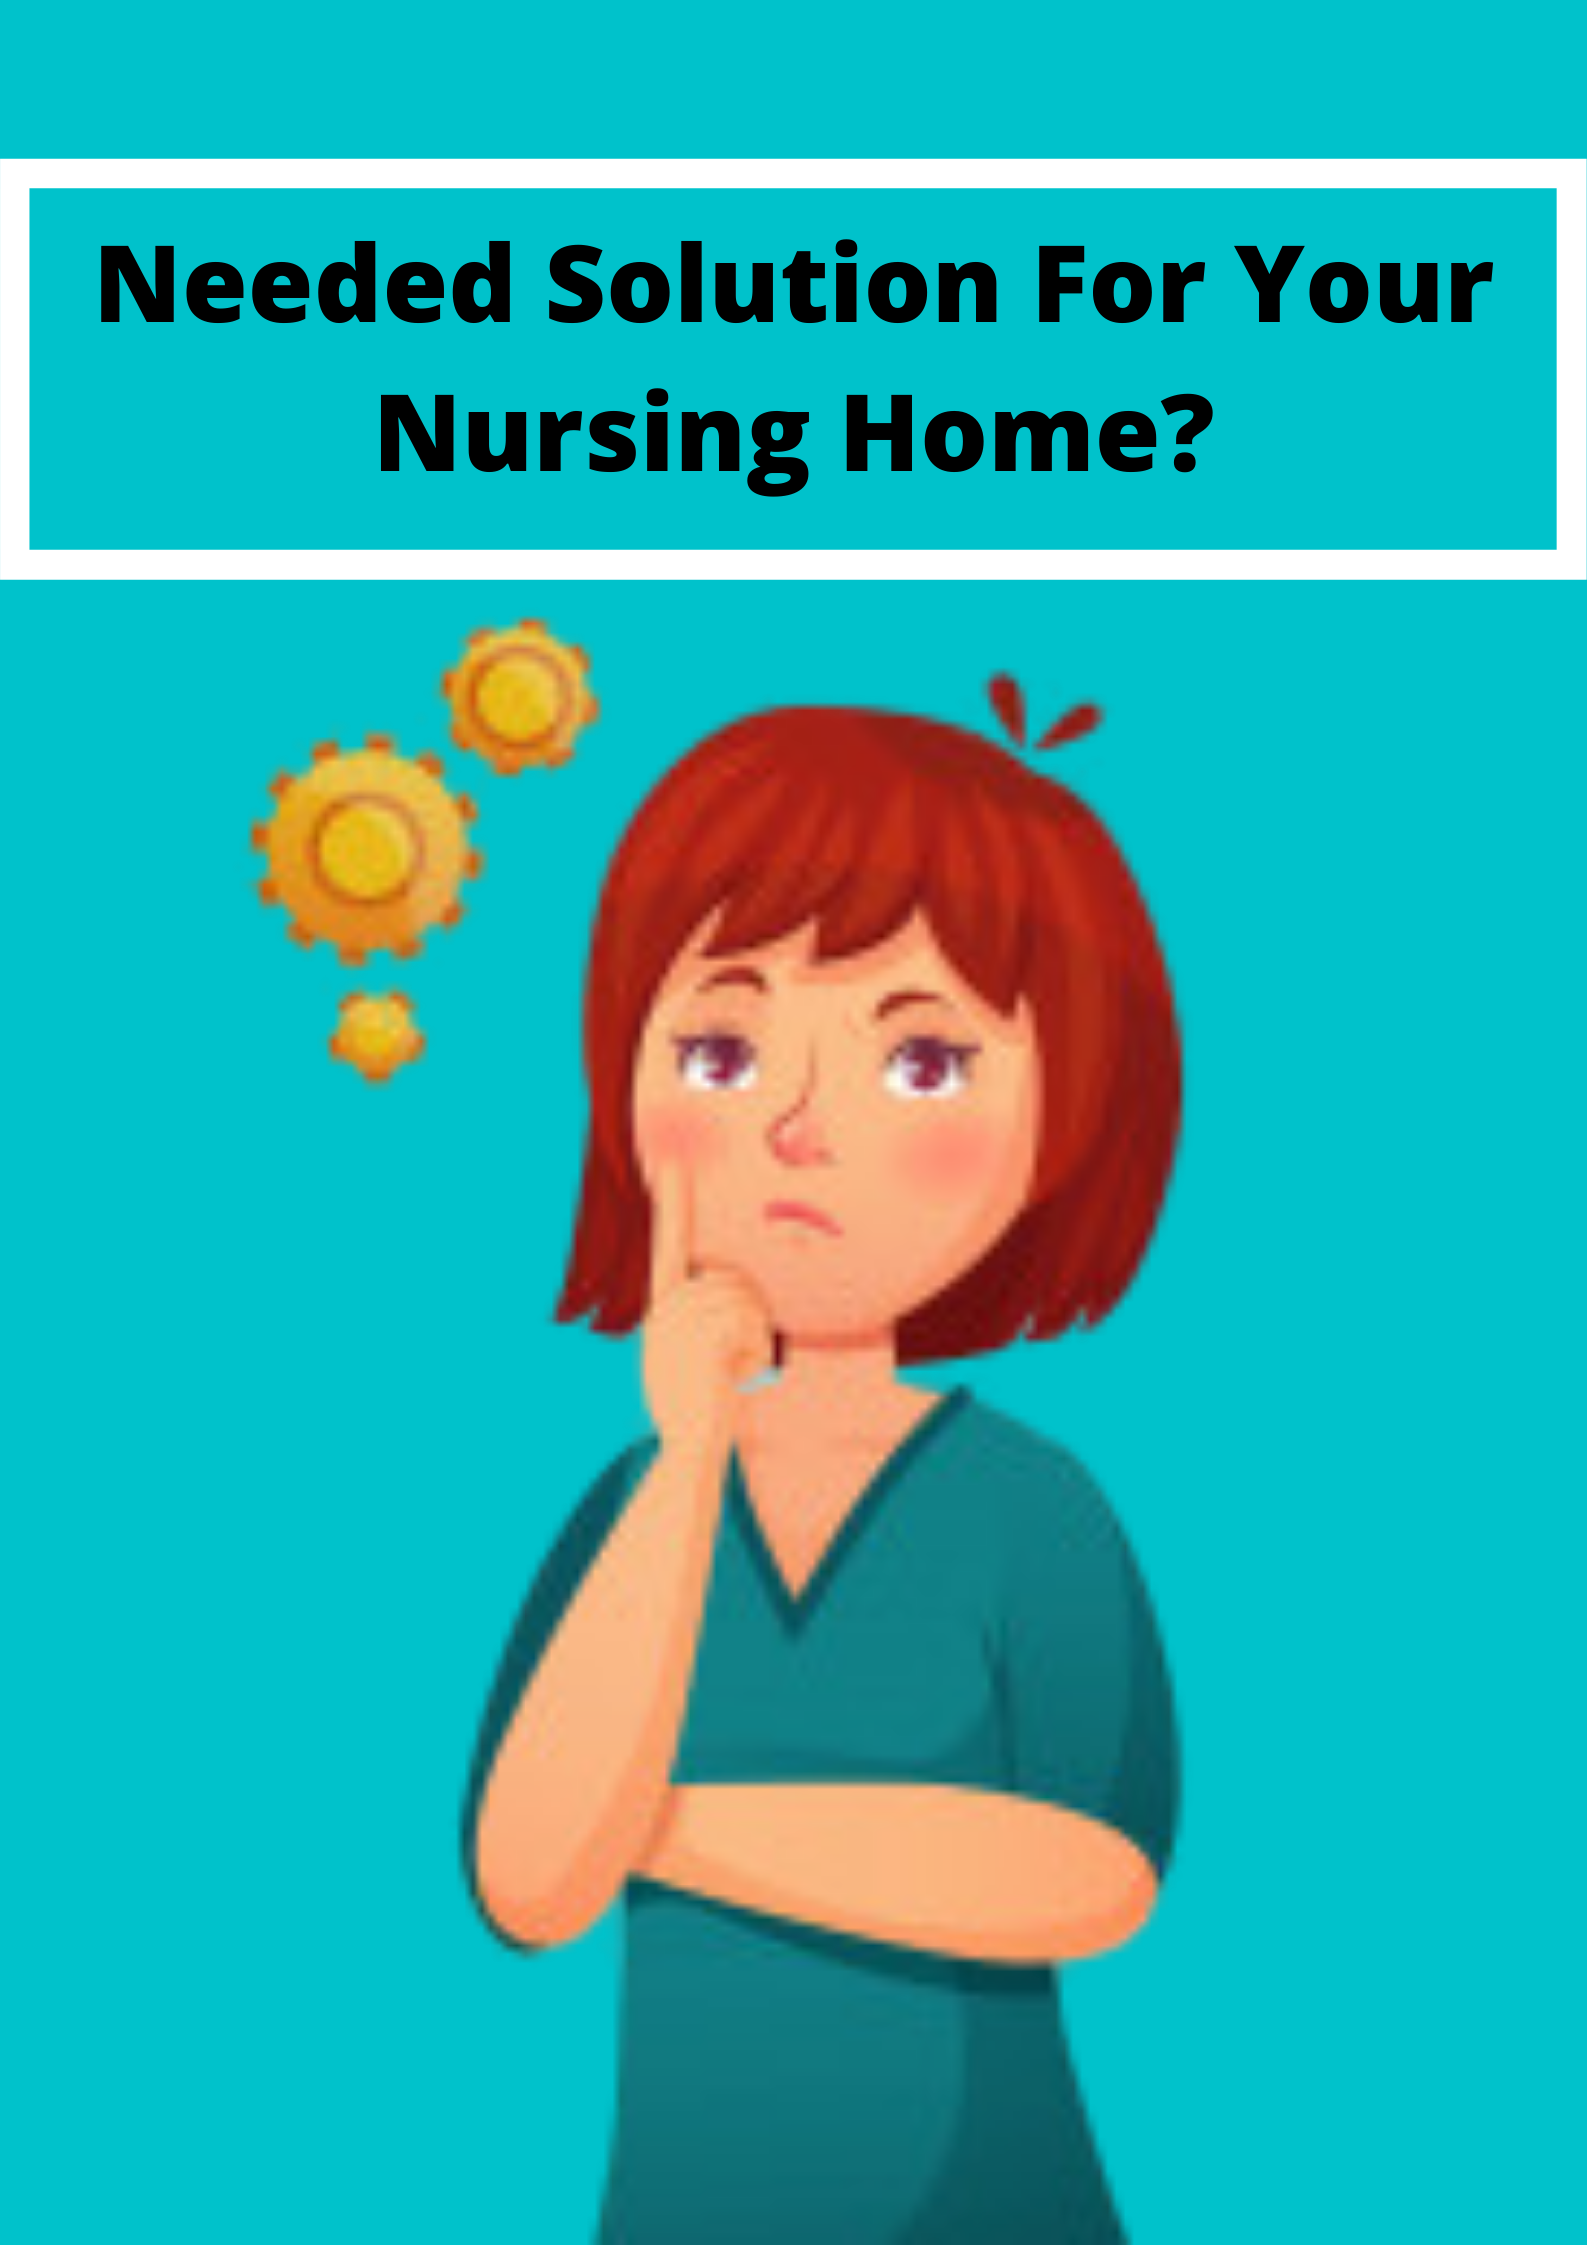 Do you need a solution for your nursing home?